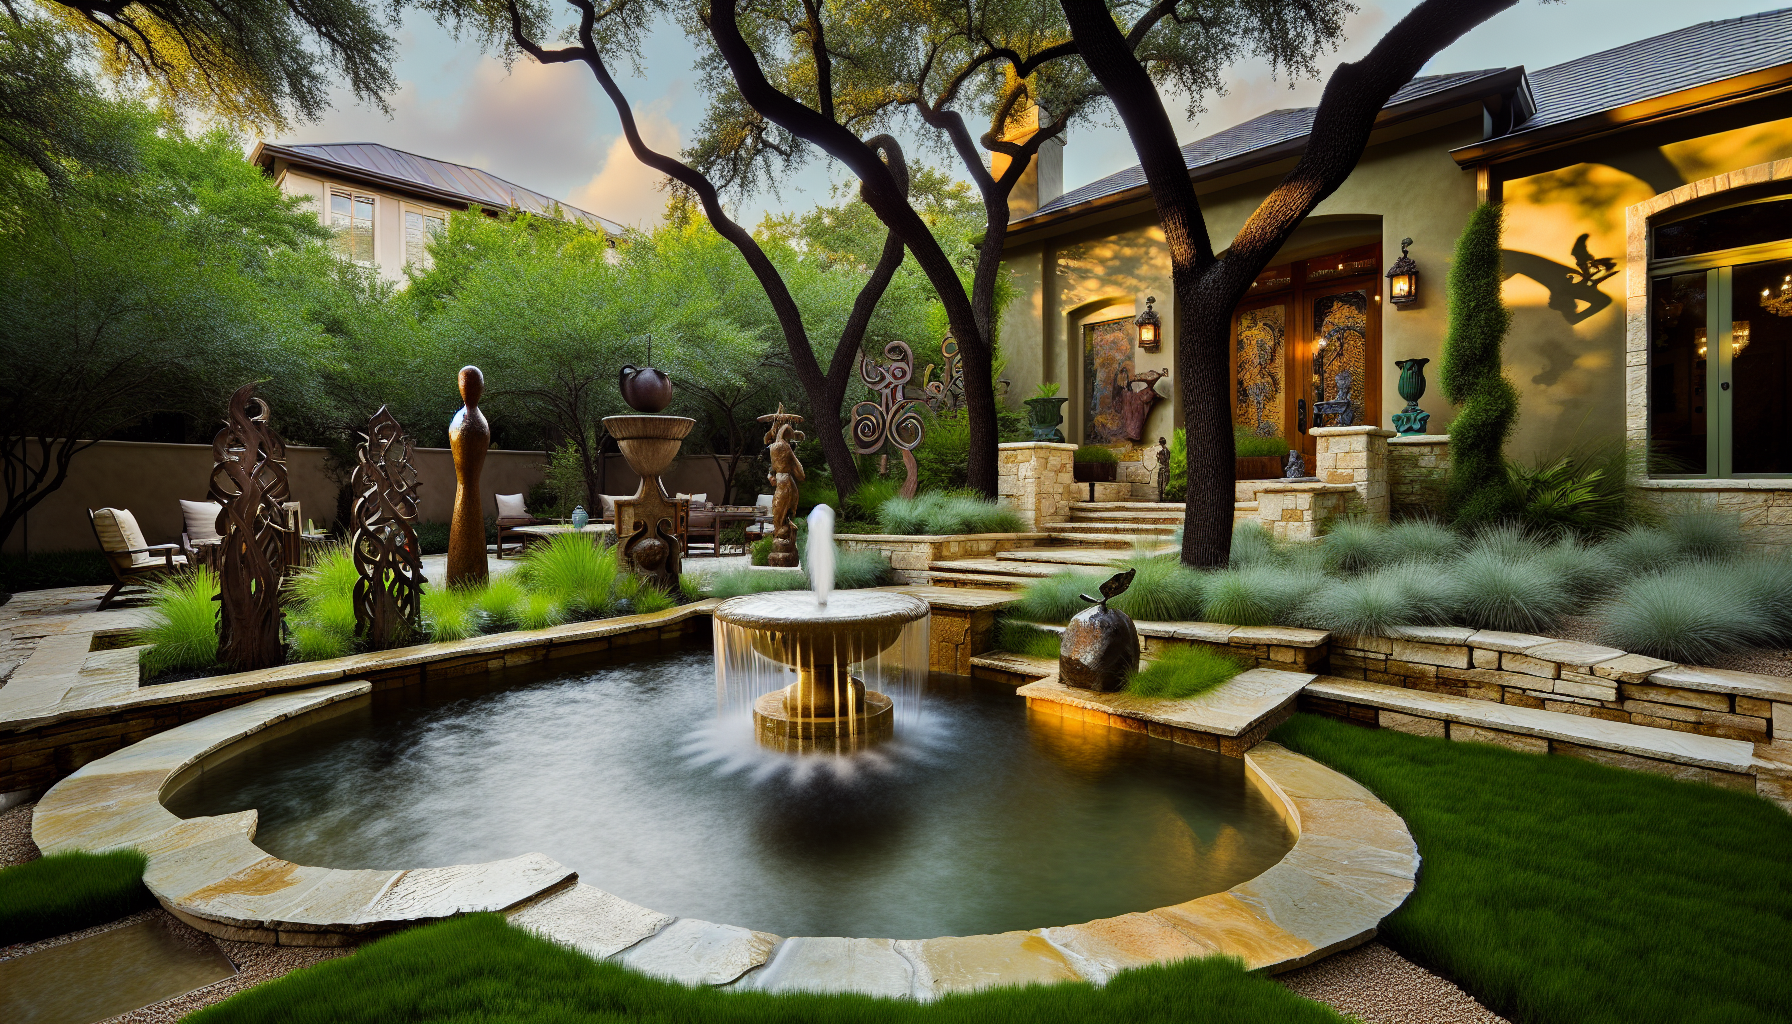 Tranquil water feature with artistic elements